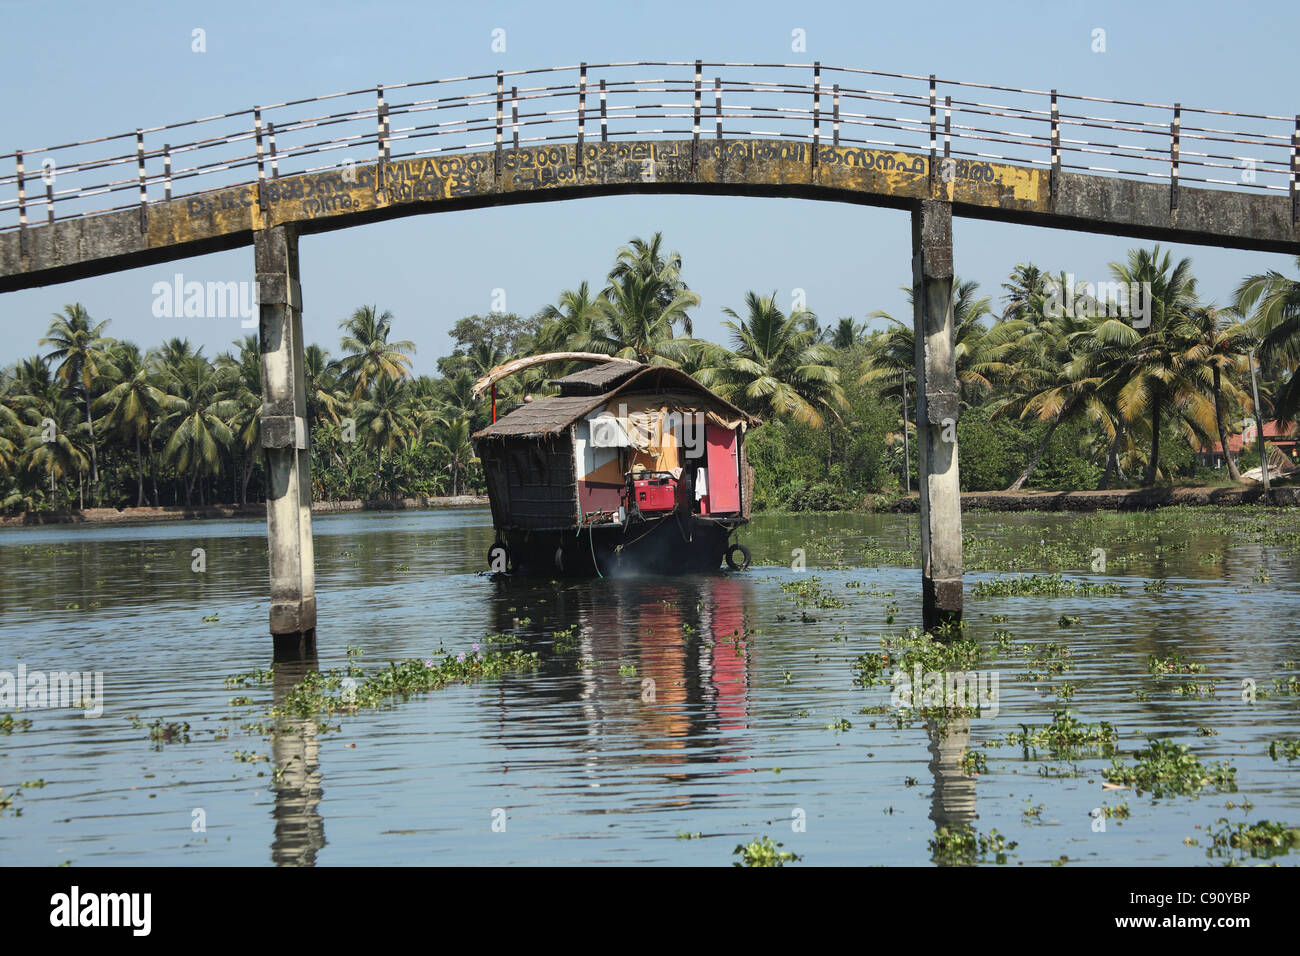 Kettuvallam are a distinctive kind of large boat found in the waters around Cochin. There are still working boats on the Stock Photo